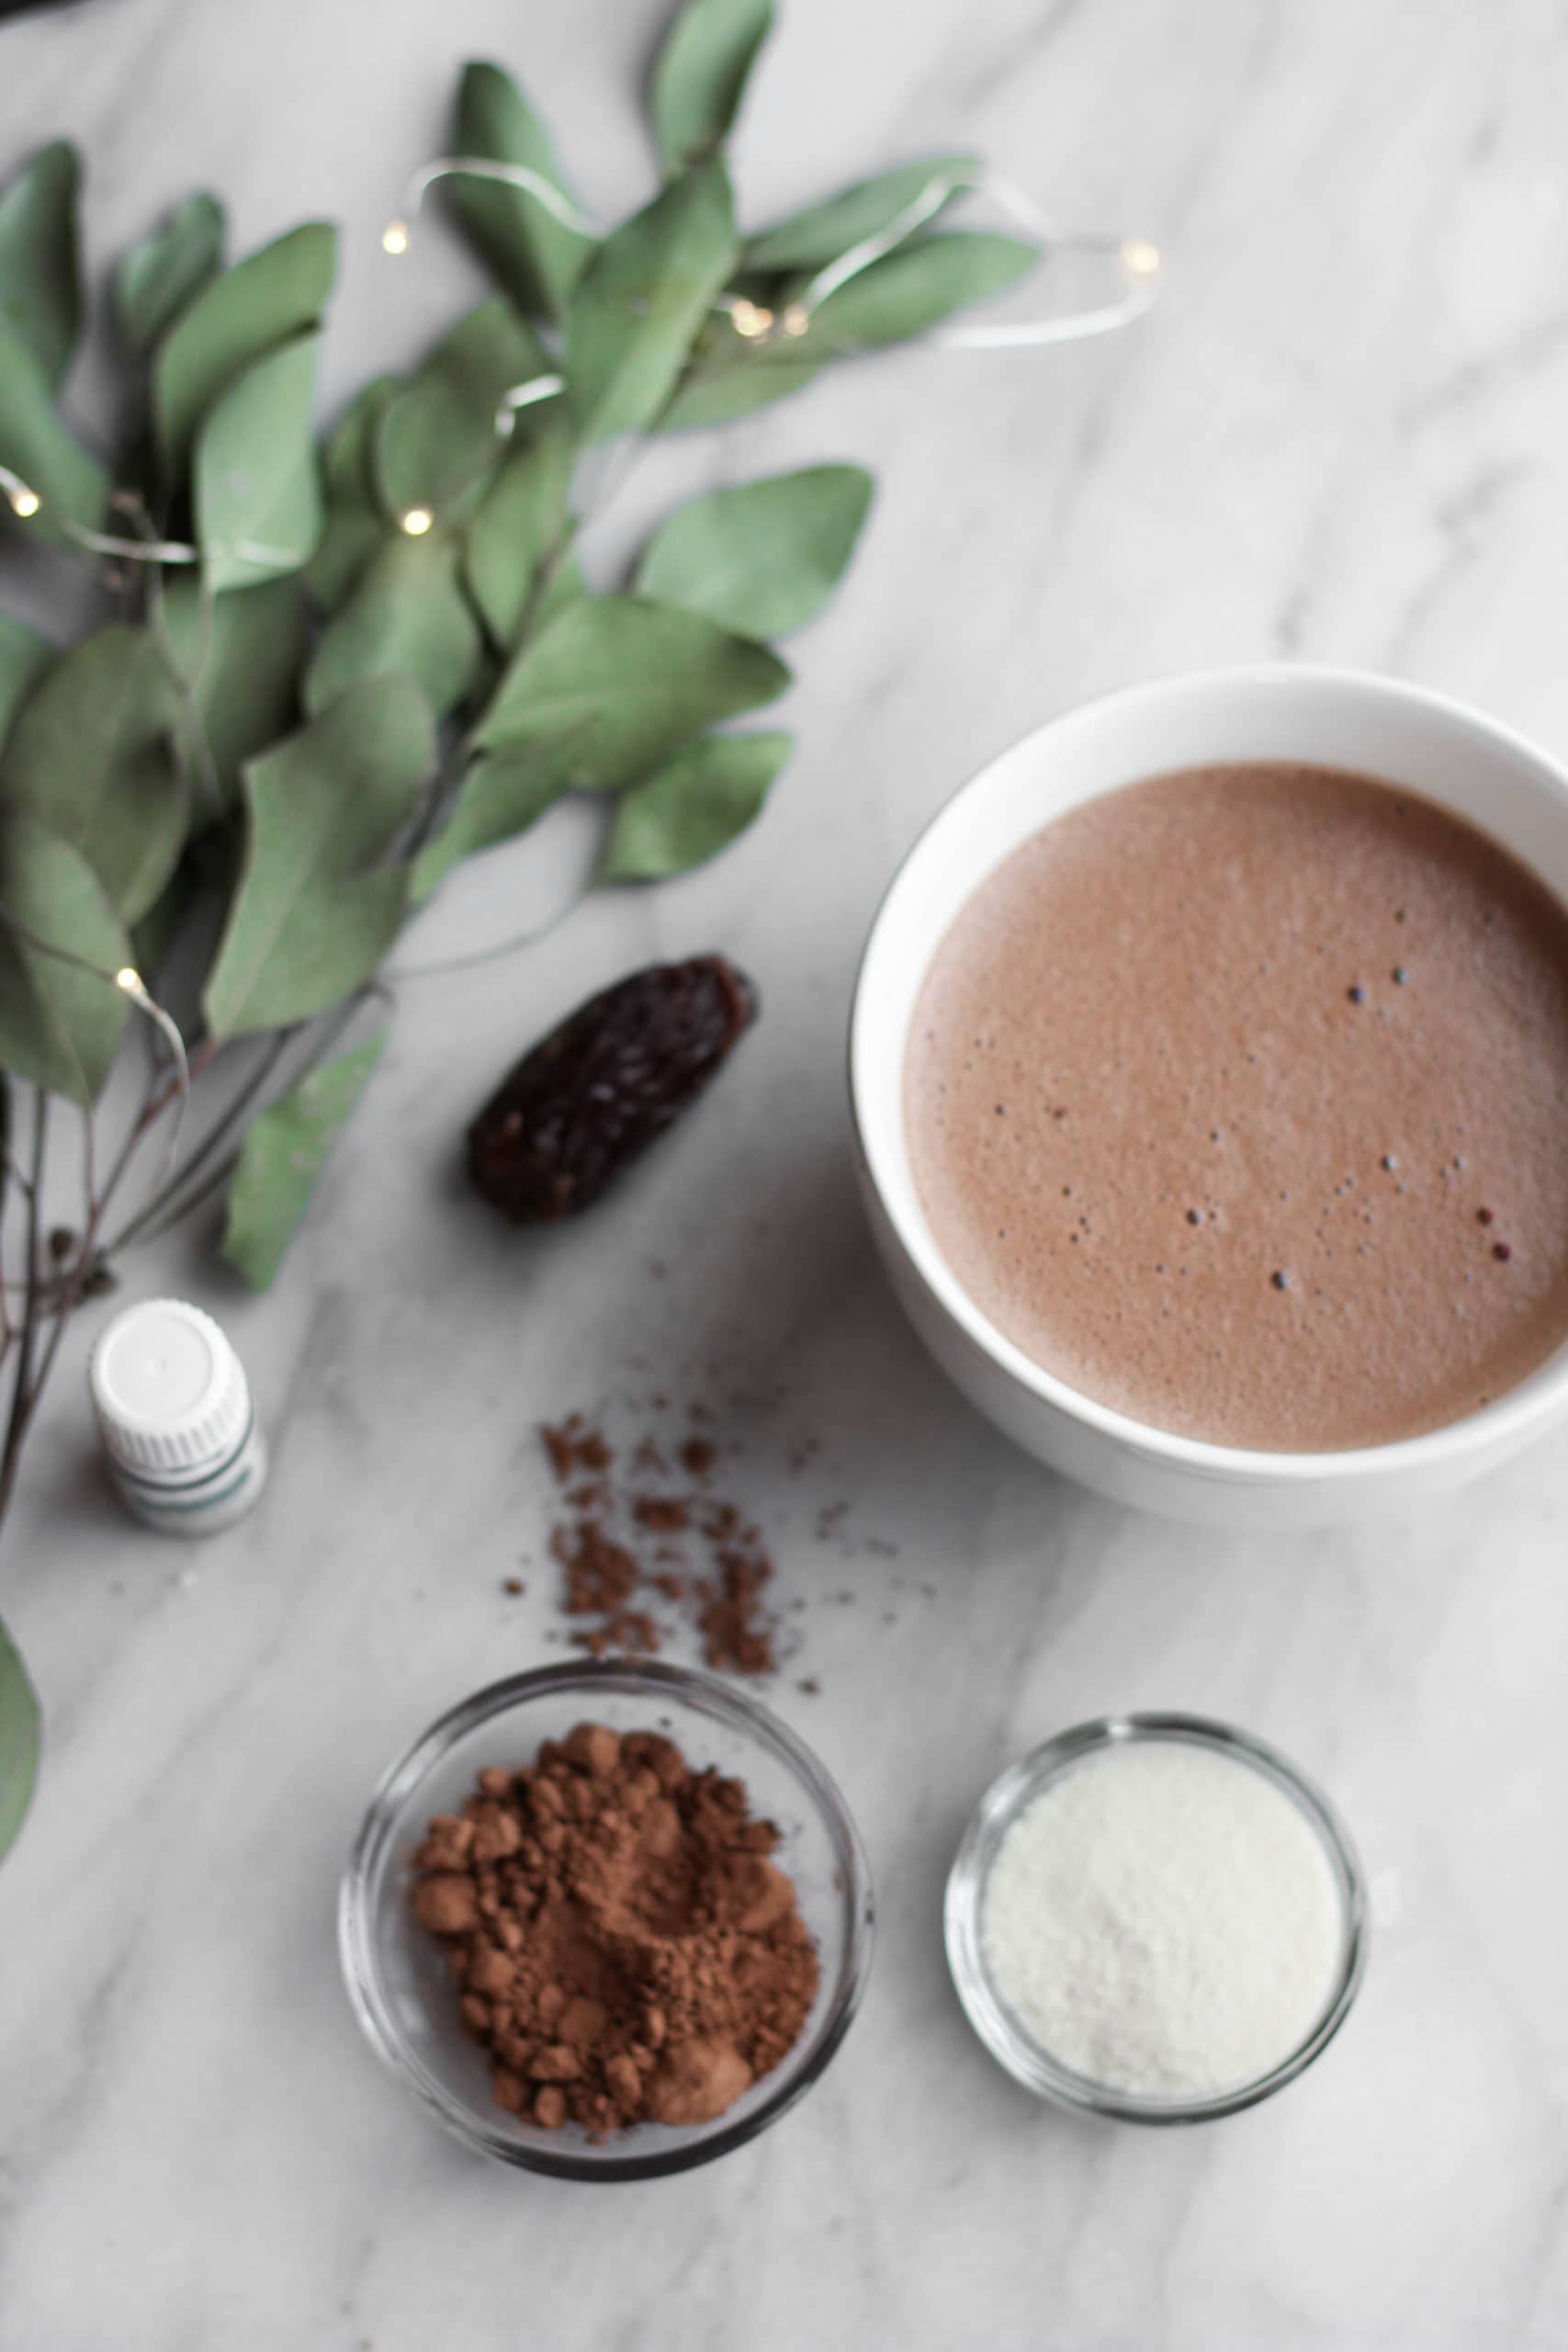 A mug of cocoa near dates, peppermint oil, bowls of cacao, and dried eucalyptus